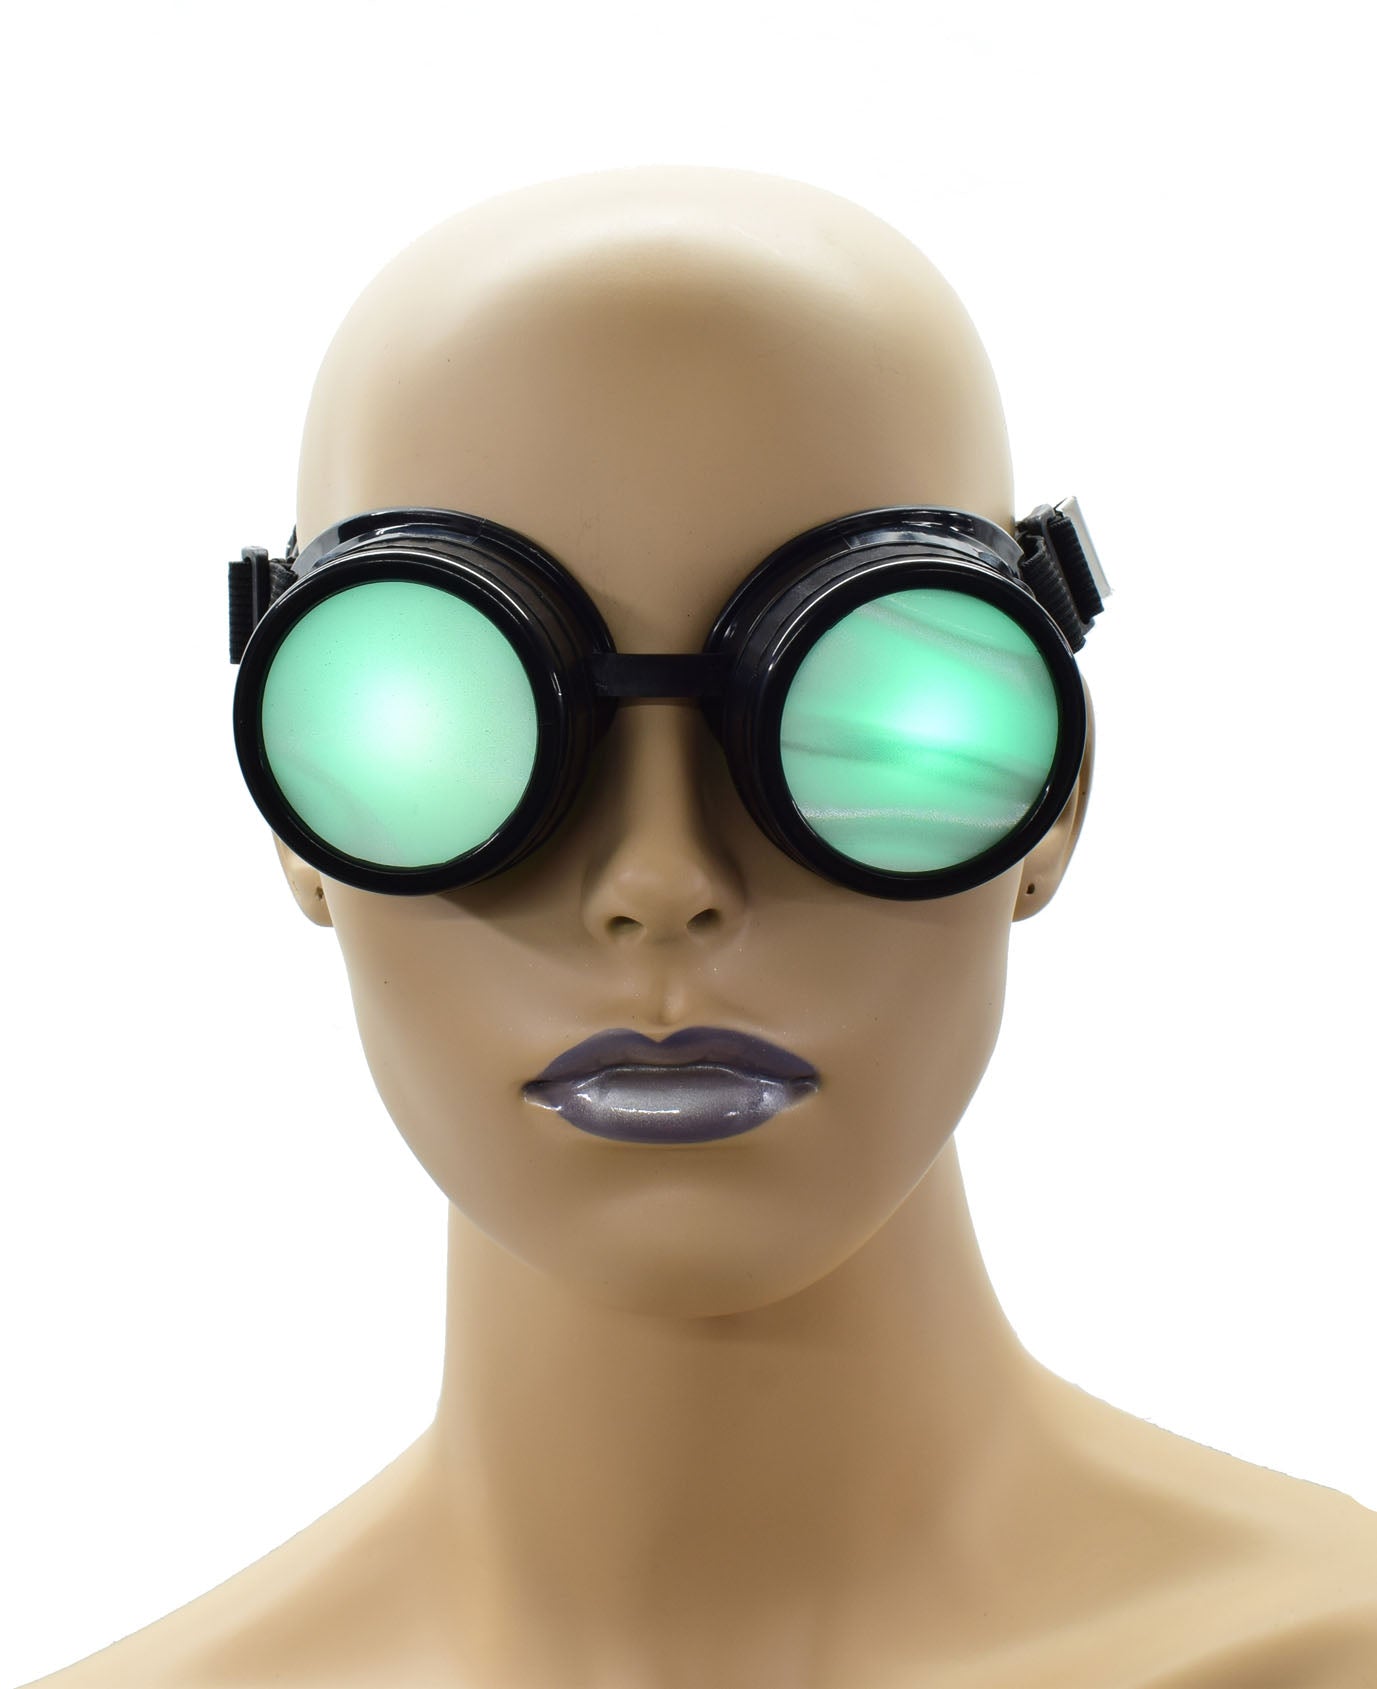 The Aurora Lights Blindfold on a mannequin head with green lights showing through the goggles, front view.